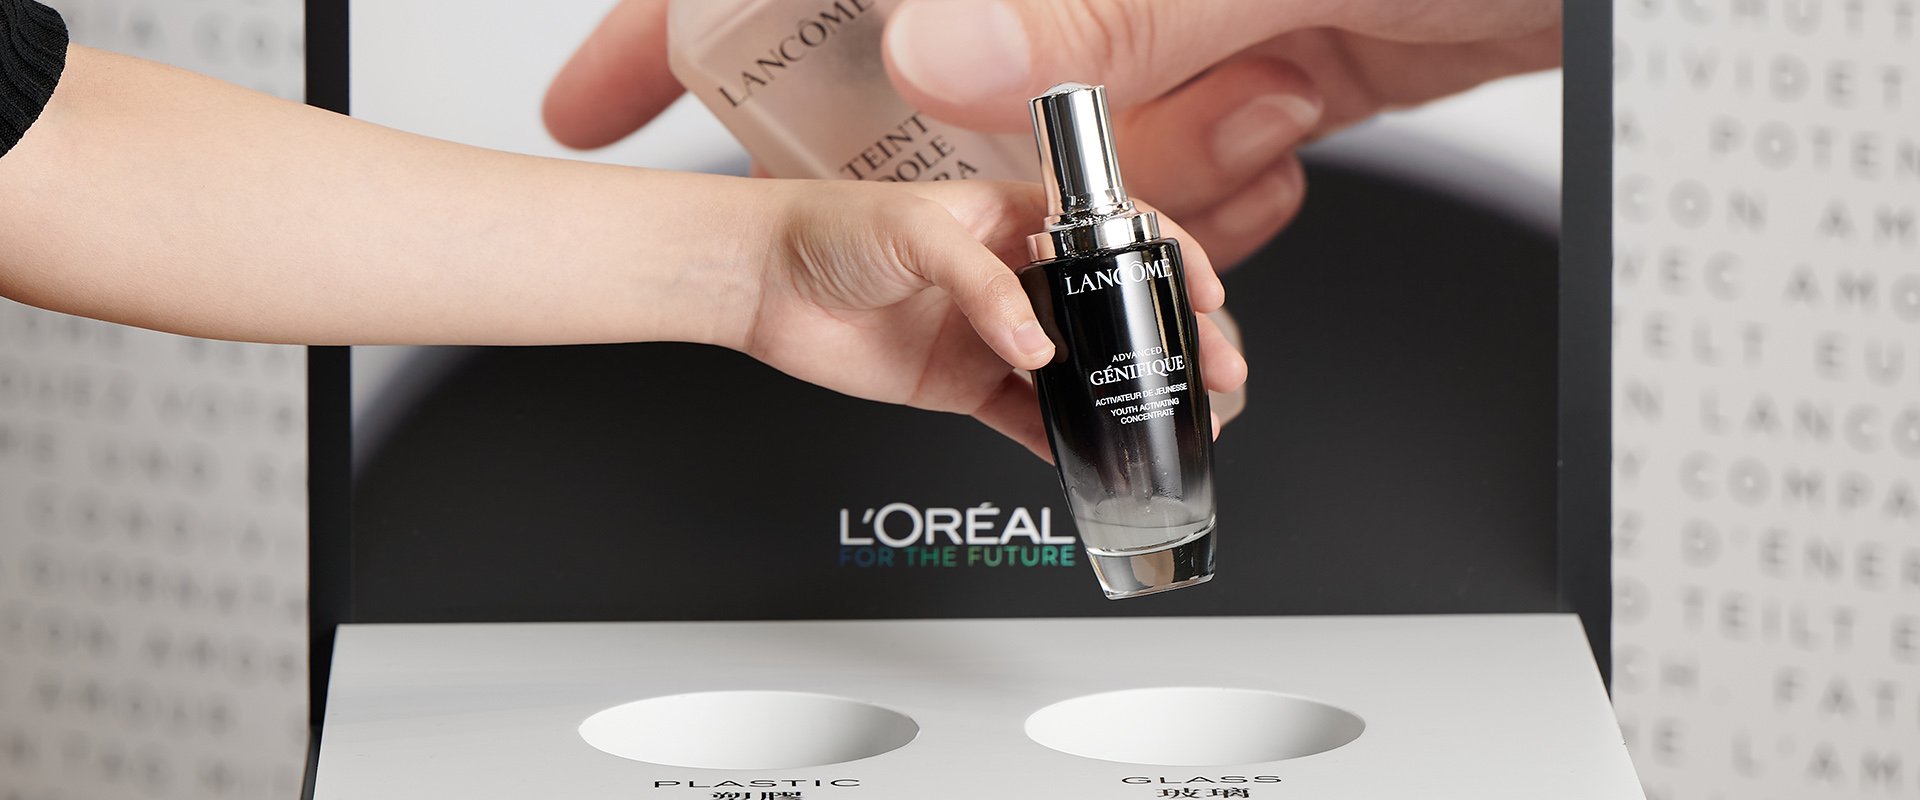 L'Oreal Hong Kong Launches Cross-brand Recycling Programme across the City